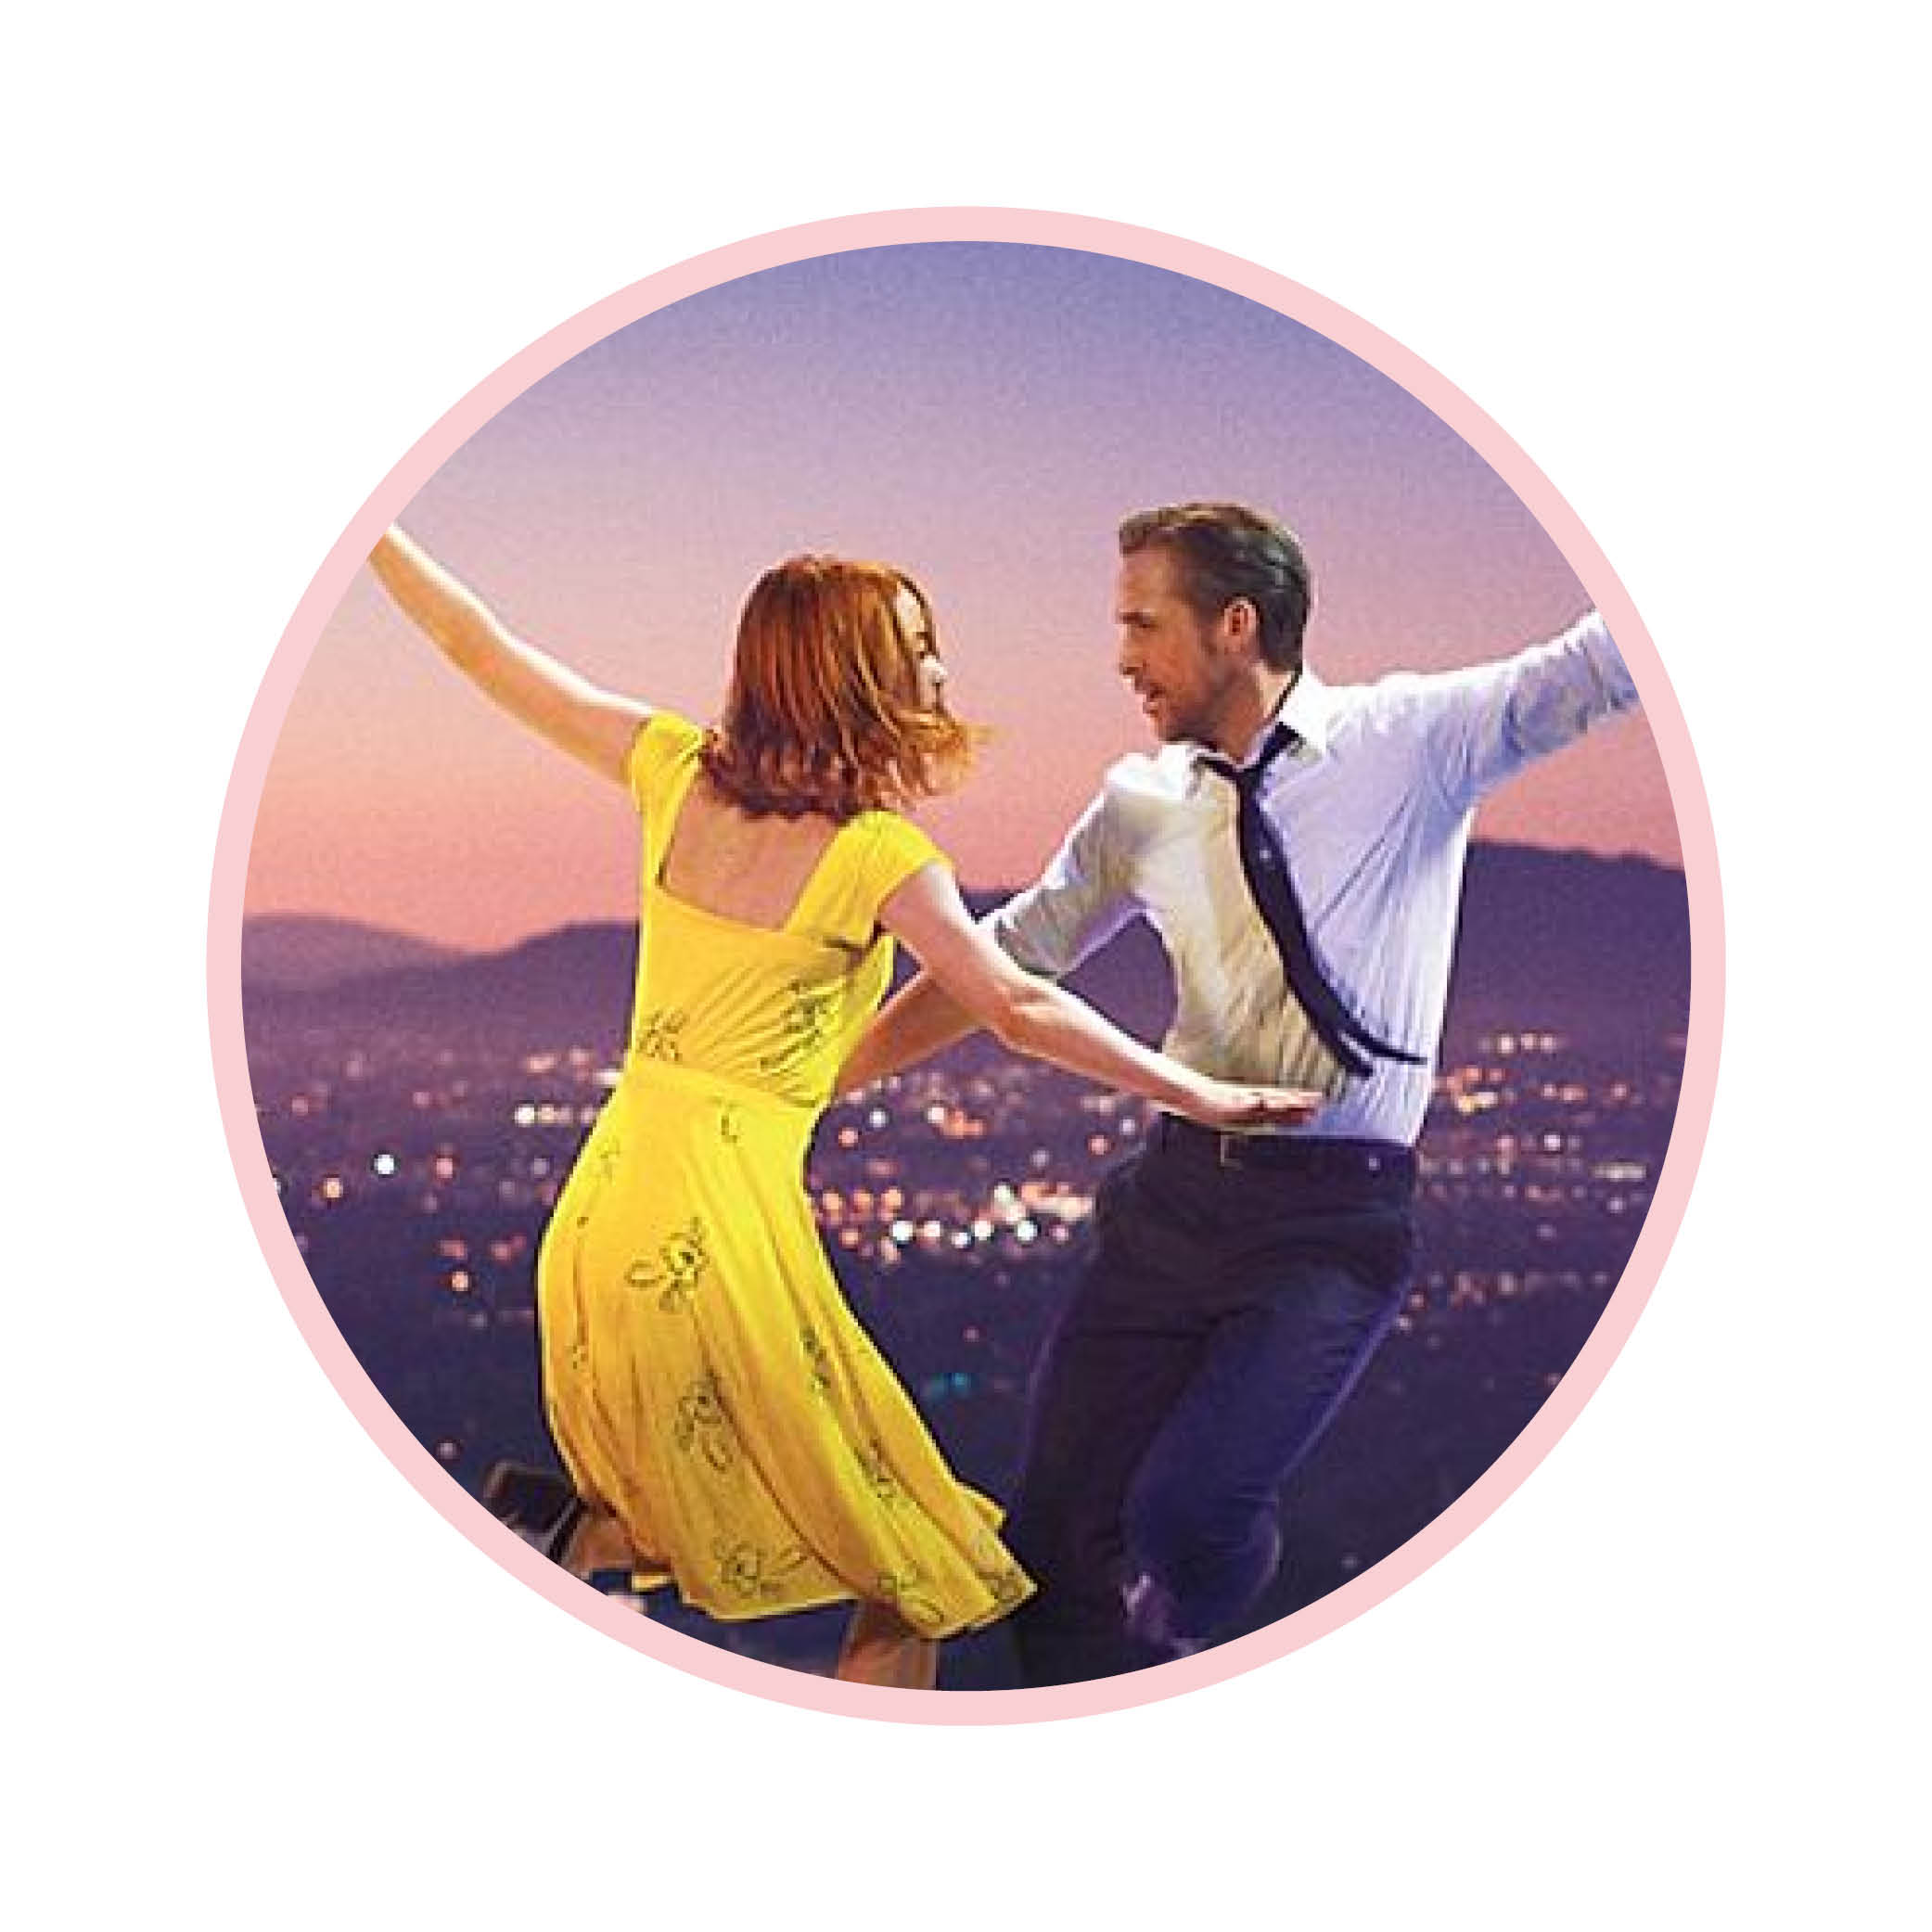 La La Land (2016) Ryan Gosling, Emma Stone - need we say more? This moving romance follows the high highs and low lows of the pursuit of one's dreams.